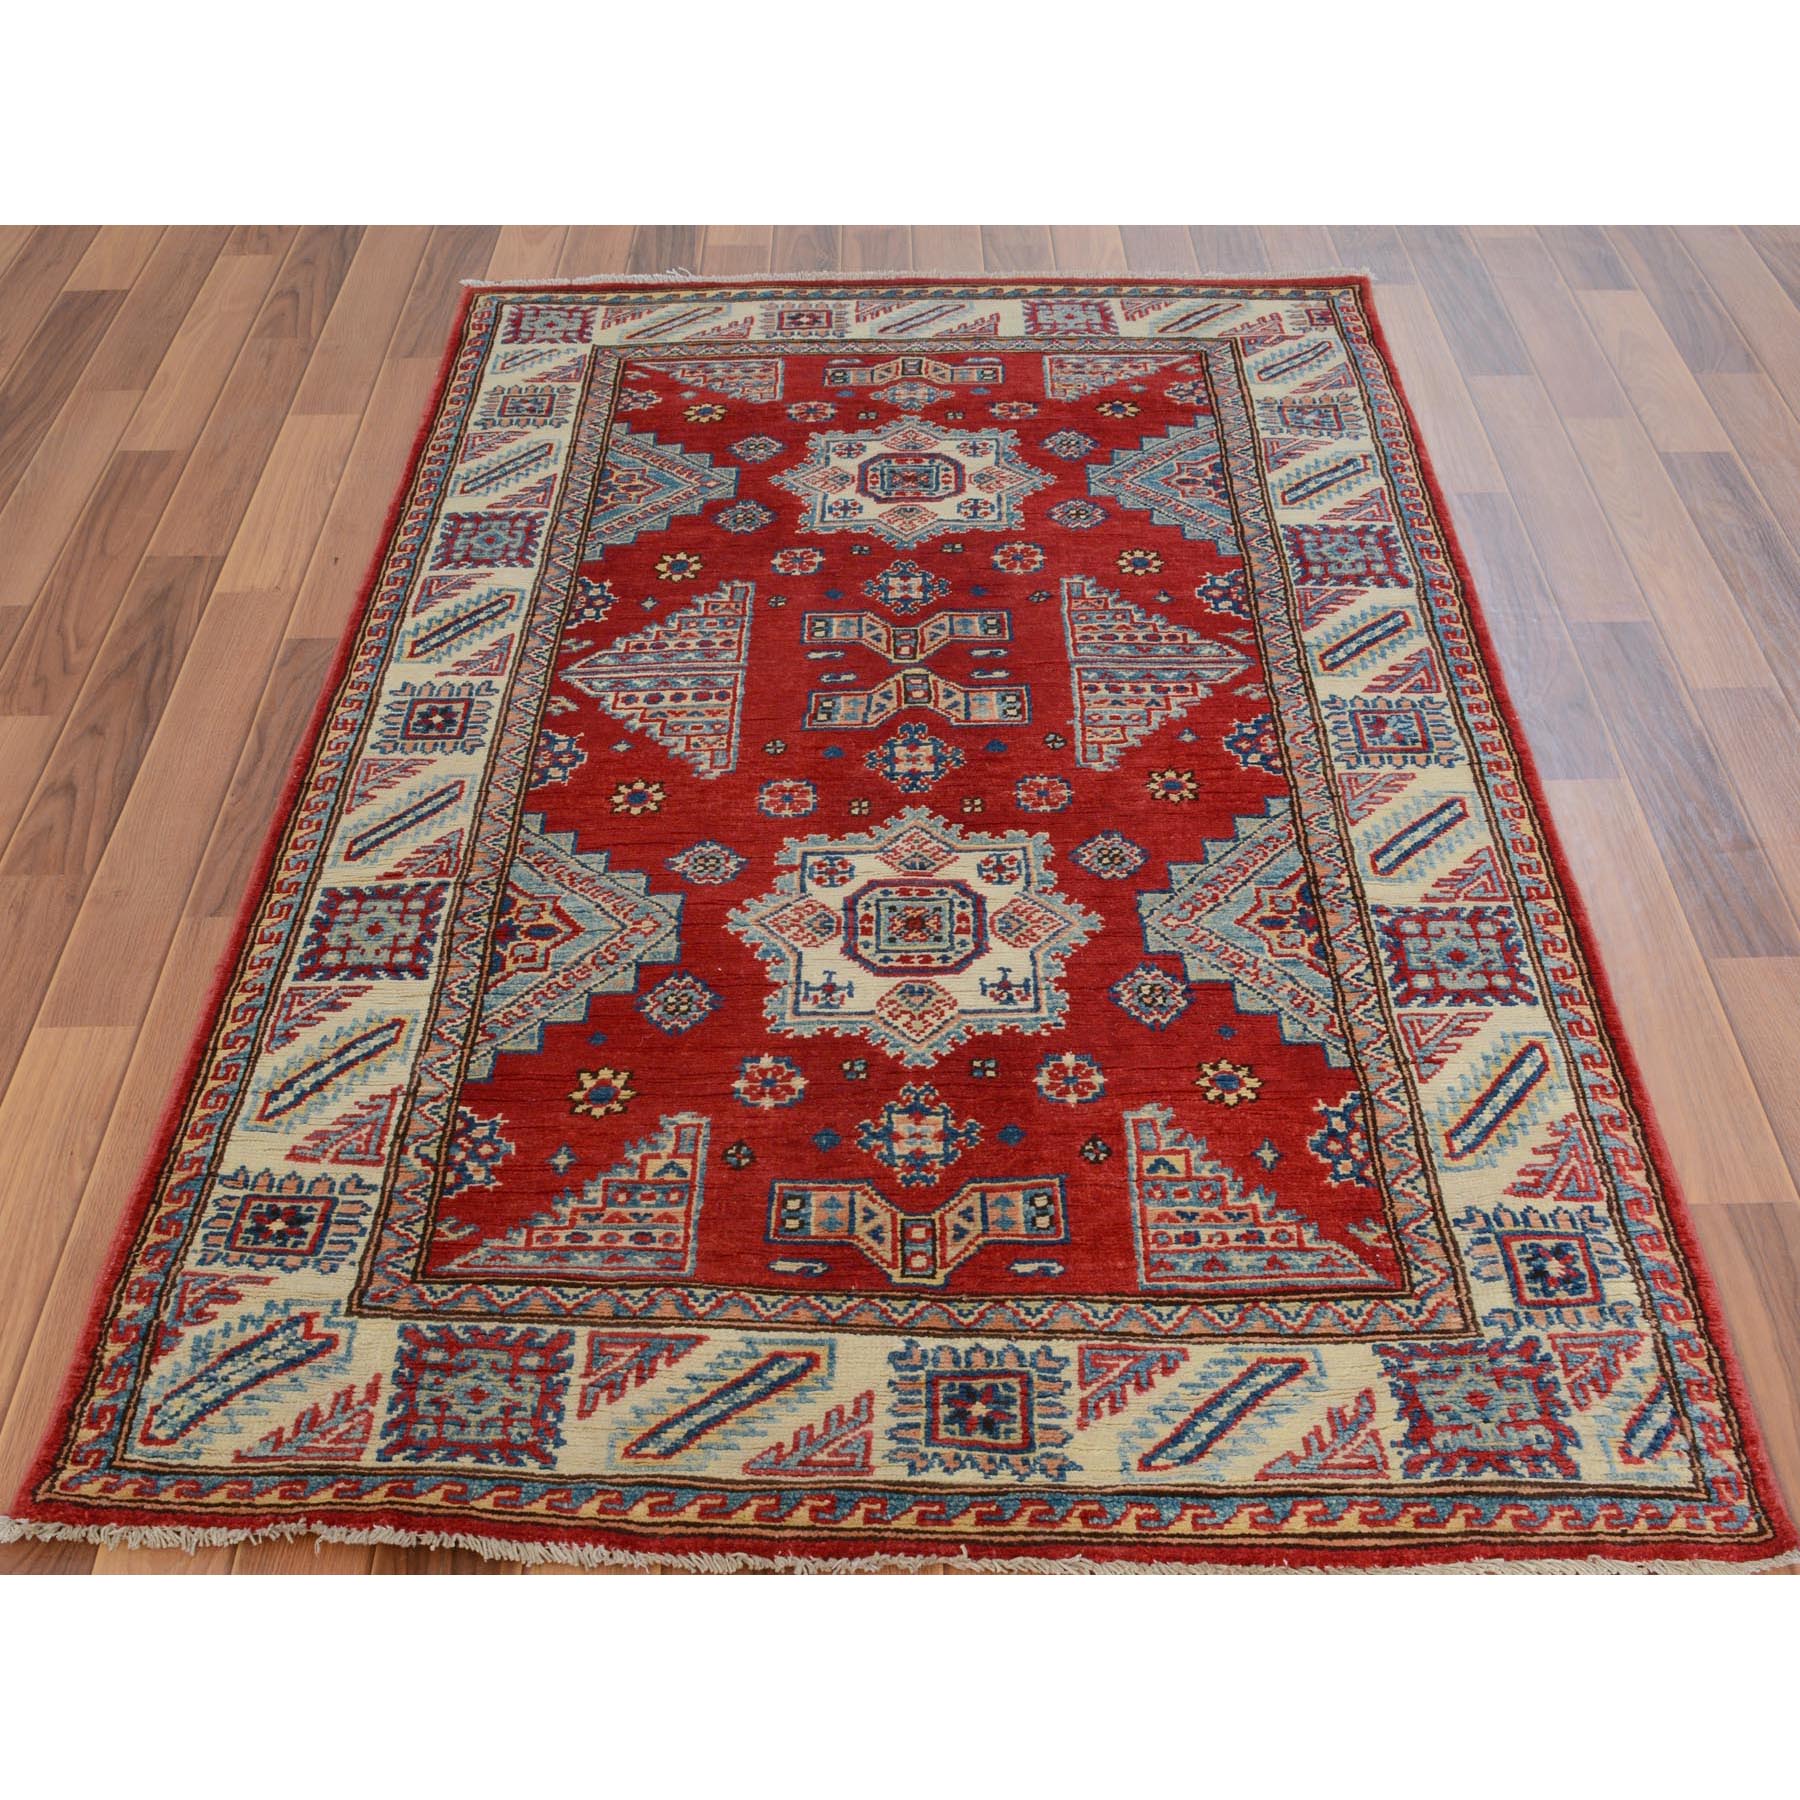 3-9 x6-4  Red Special Kazak Tribal Design Pure Wool Hand Knotted Oriental Rug 